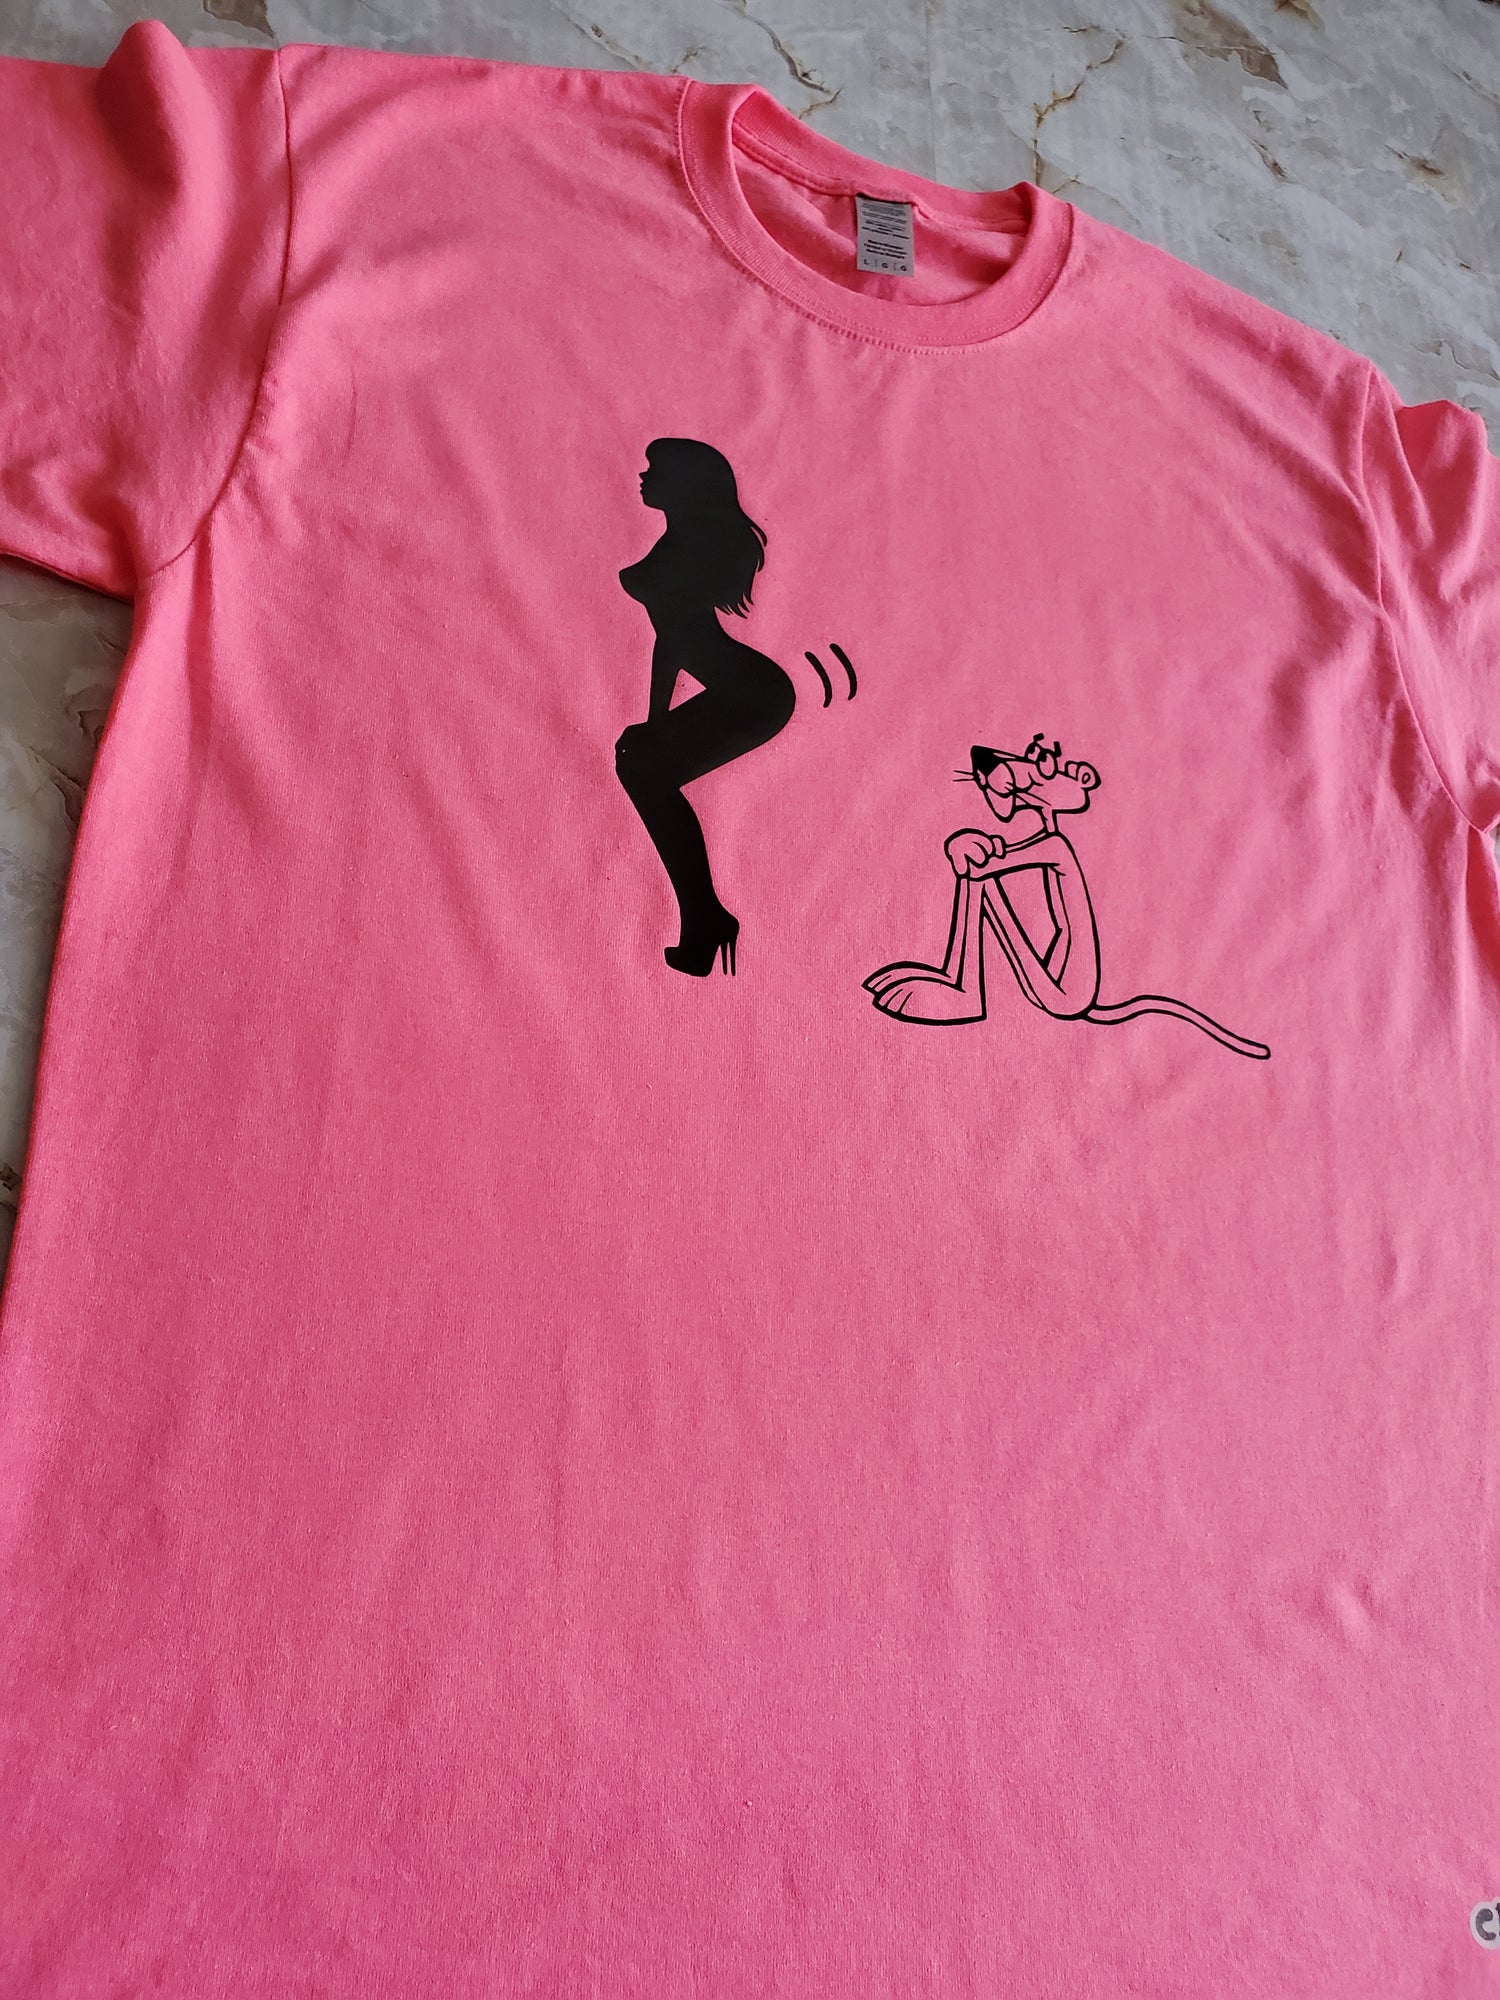 Twerk Som' Pink Panther T-Shirt - Centre Ave Clothing Co.